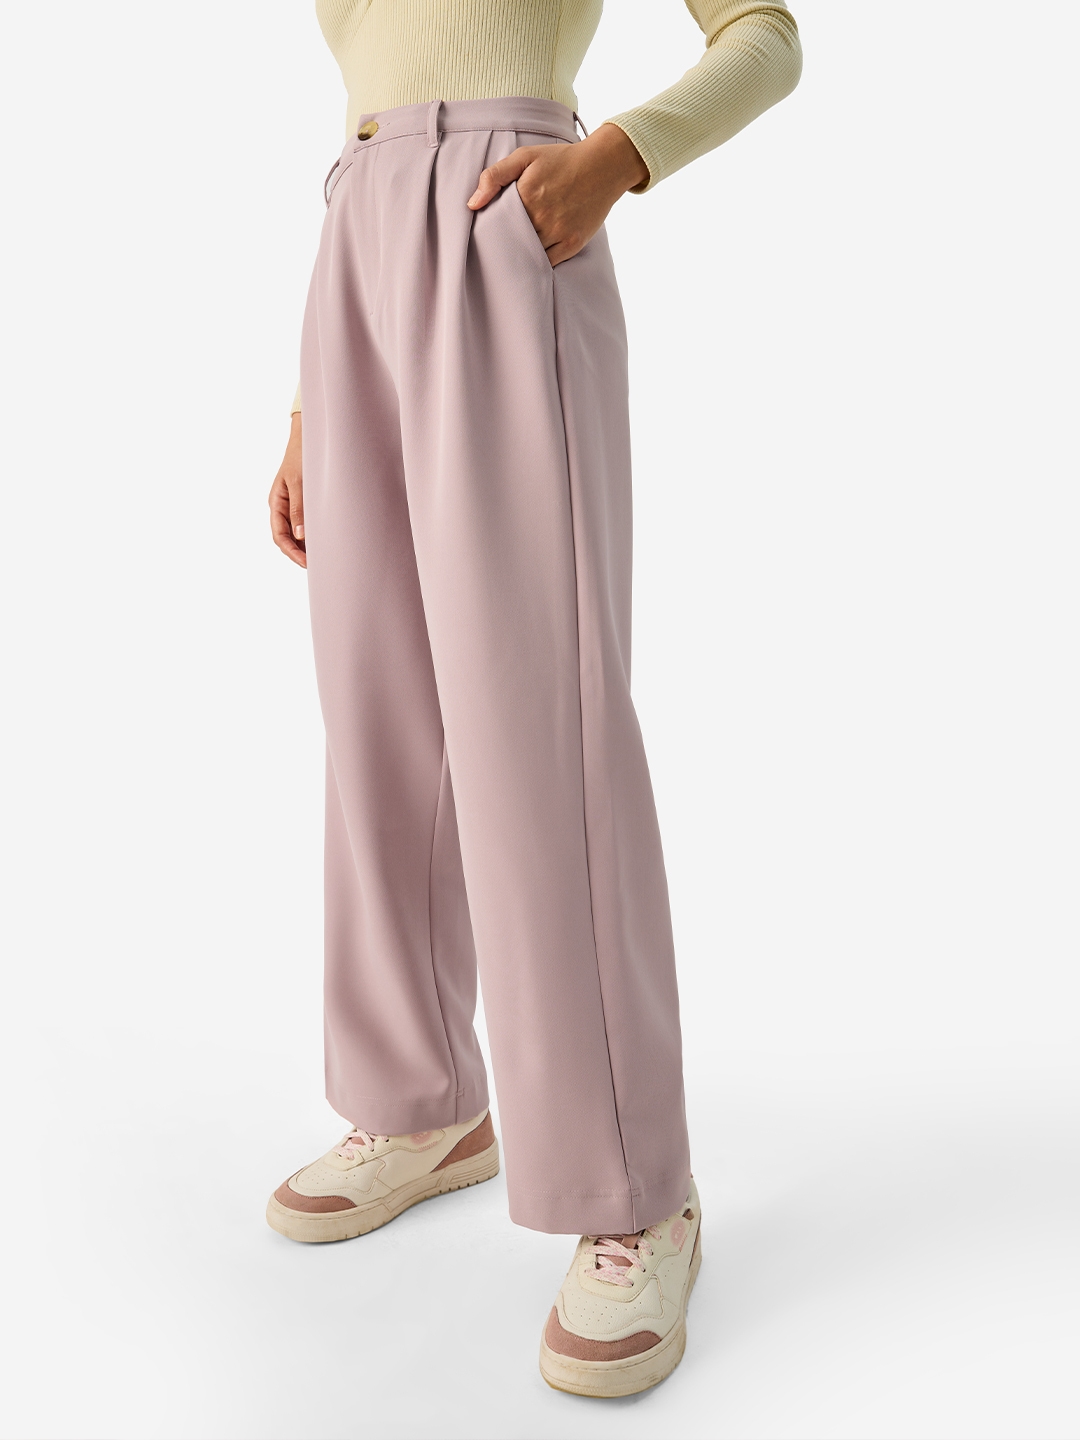 The Souled Store | Women's Solids Dusky Rose Pants